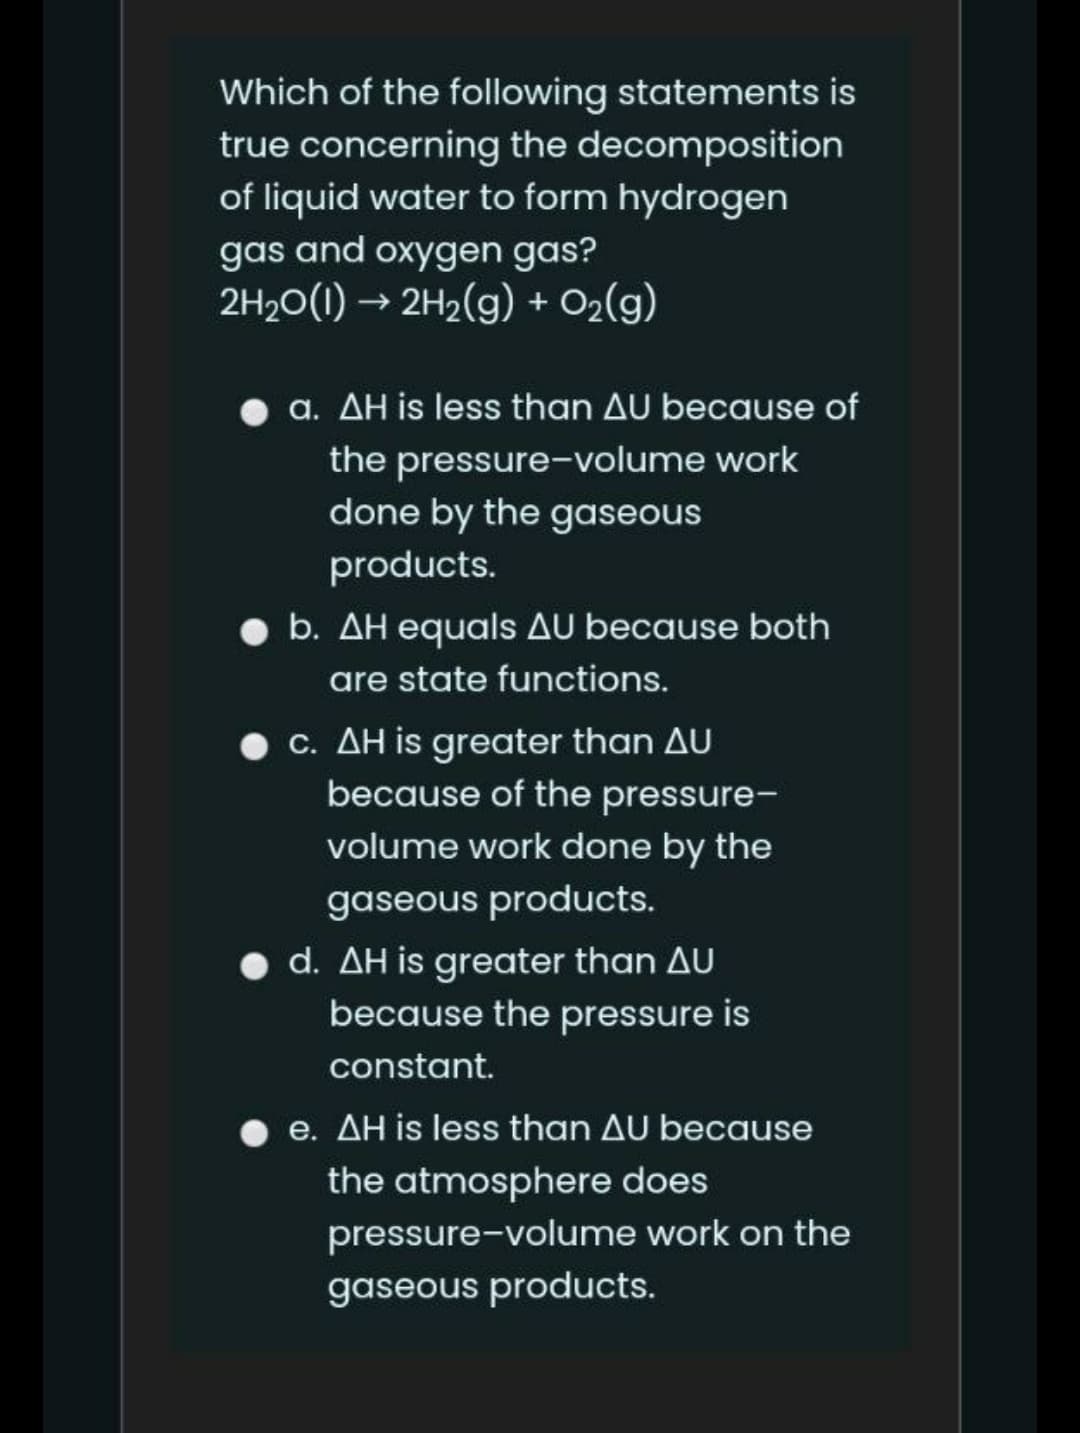 Which of the following statements is
true concerning the decomposition
of liquid water to form hydrogen
gas and oxygen gas?
2H20(1) → 2H2(g) + O2(g)
a. AH is less than AU because of
the pressure-volume work
done by the gaseous
products.
b. AH equals AU because both
are state functions.
c. AH is greater than AU
because of the pressure-
volume work done by the
gaseous products.
• d. AH is greater than AU
because the pressure is
constant.
e. AH is less than AU because
the atmosphere does
pressure-volume work on the
gaseous products.
